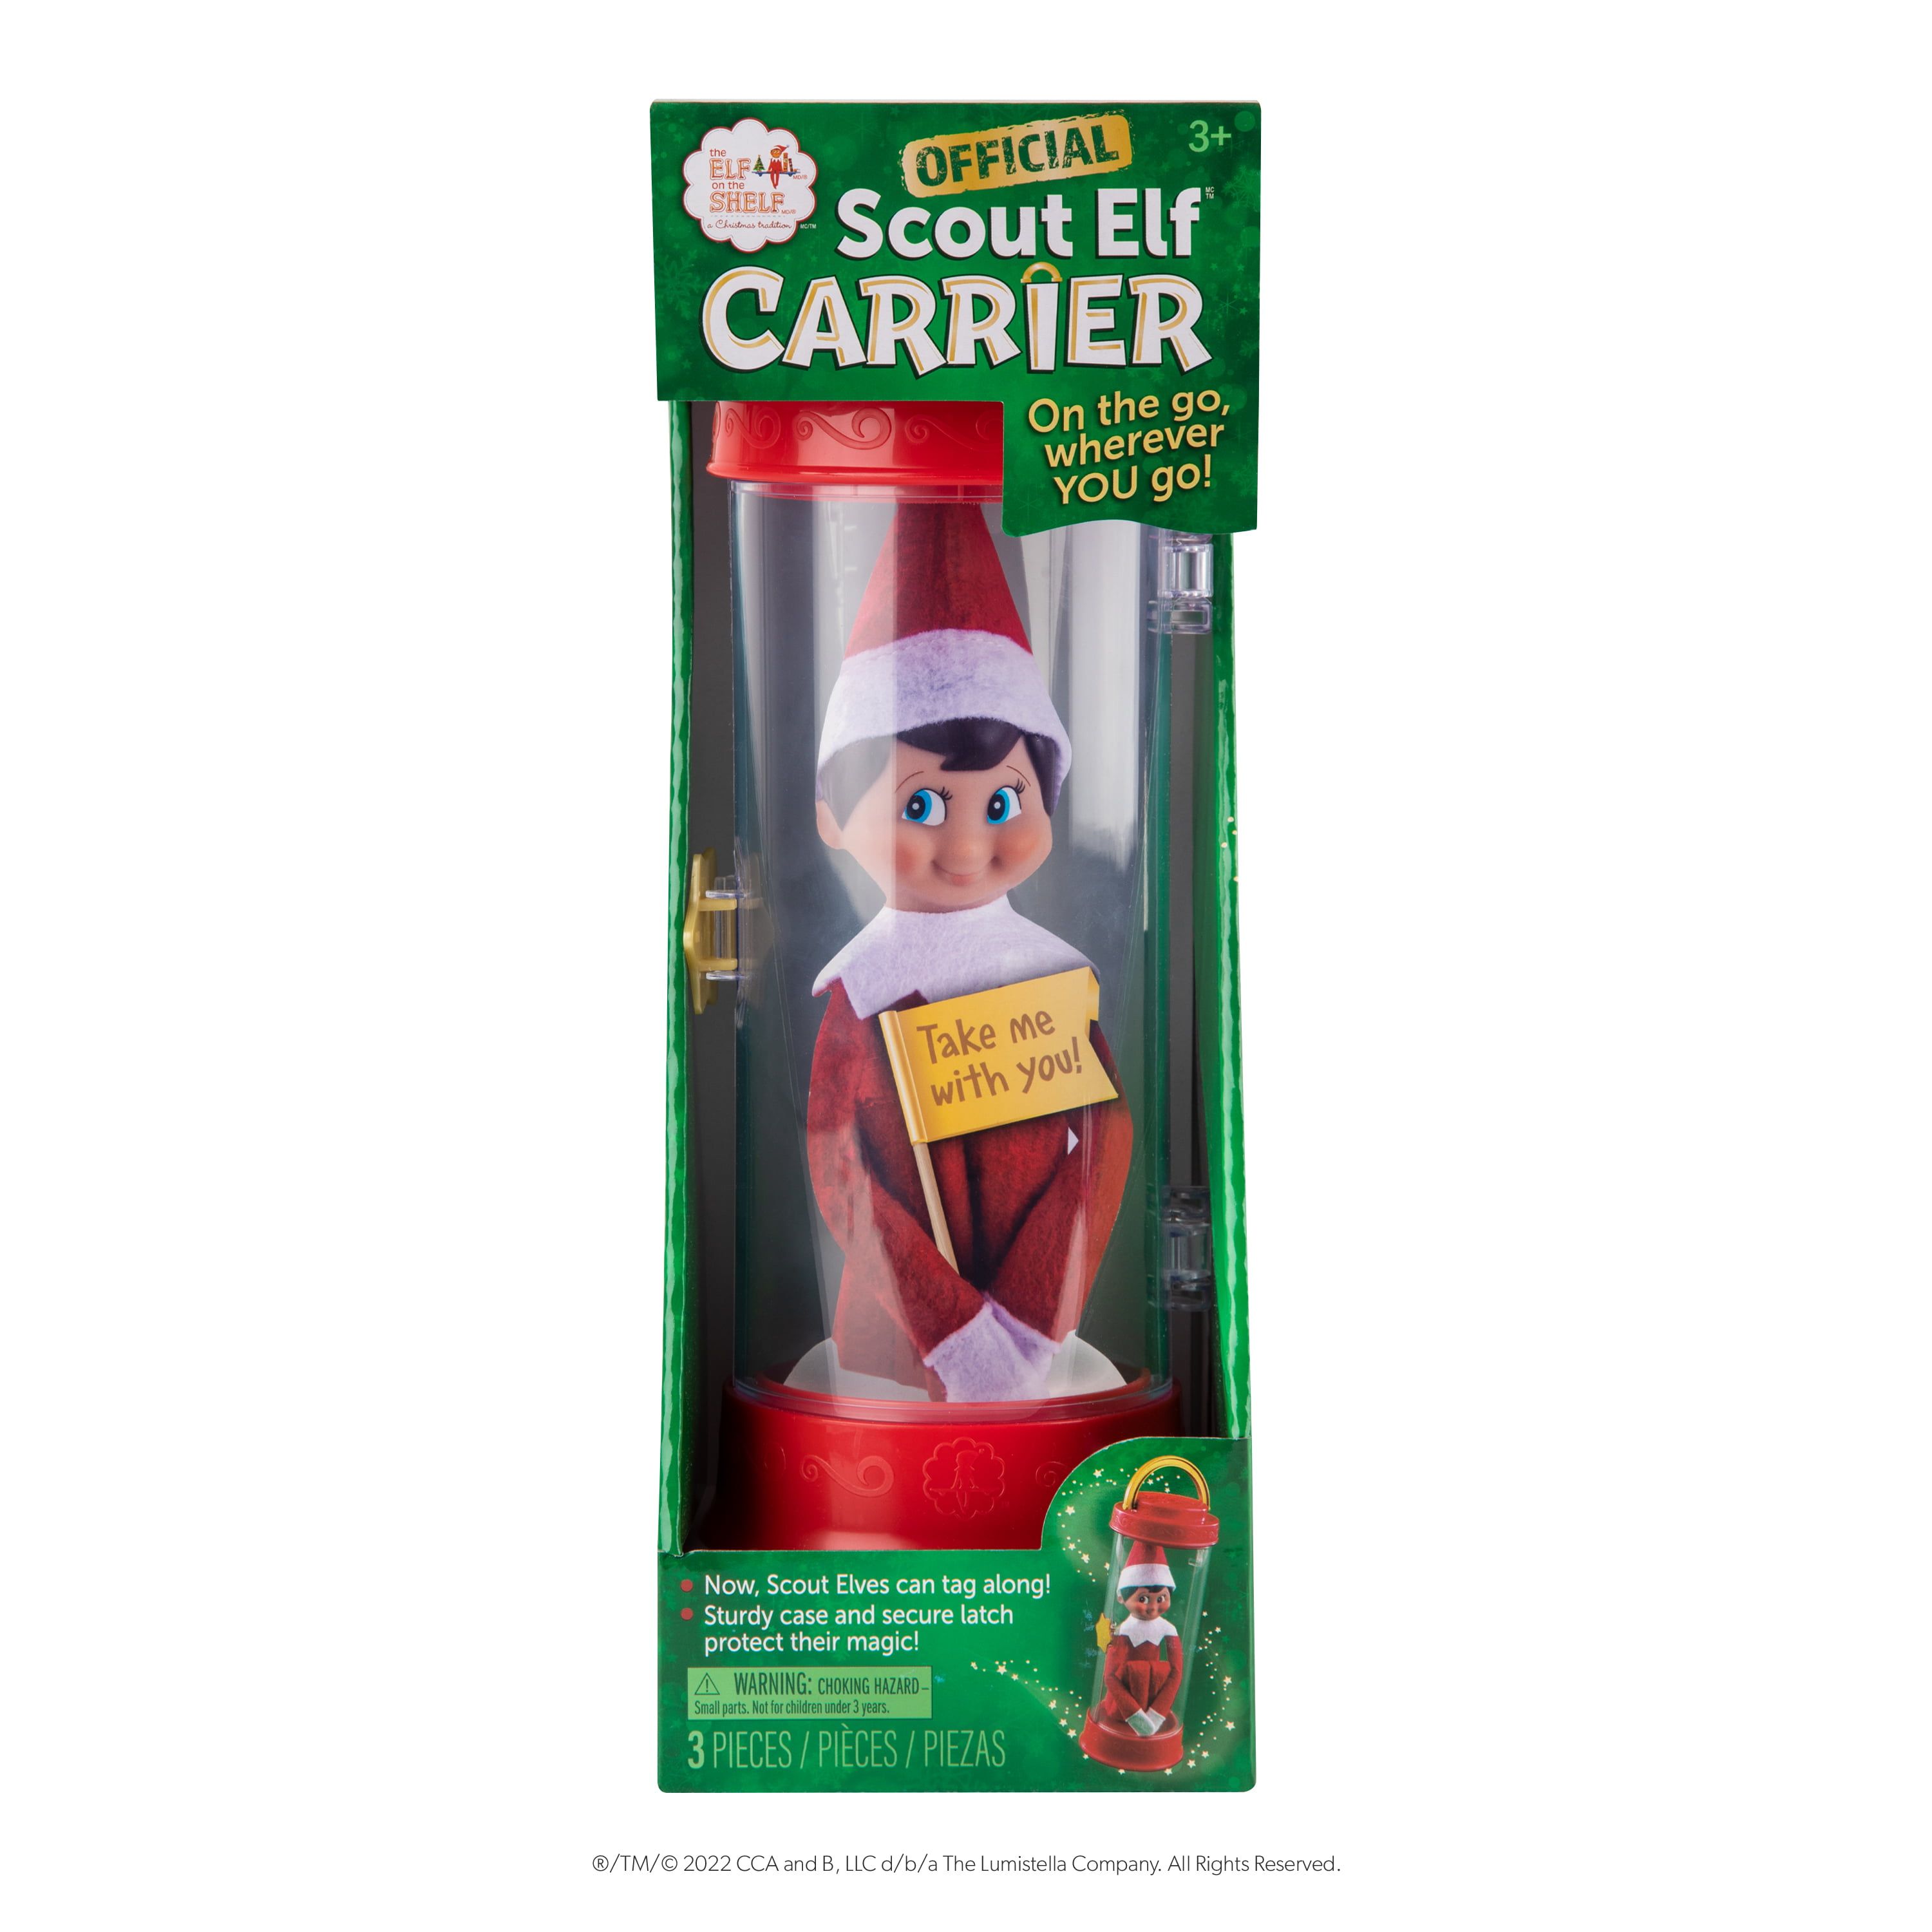 Scout Elf Carrier